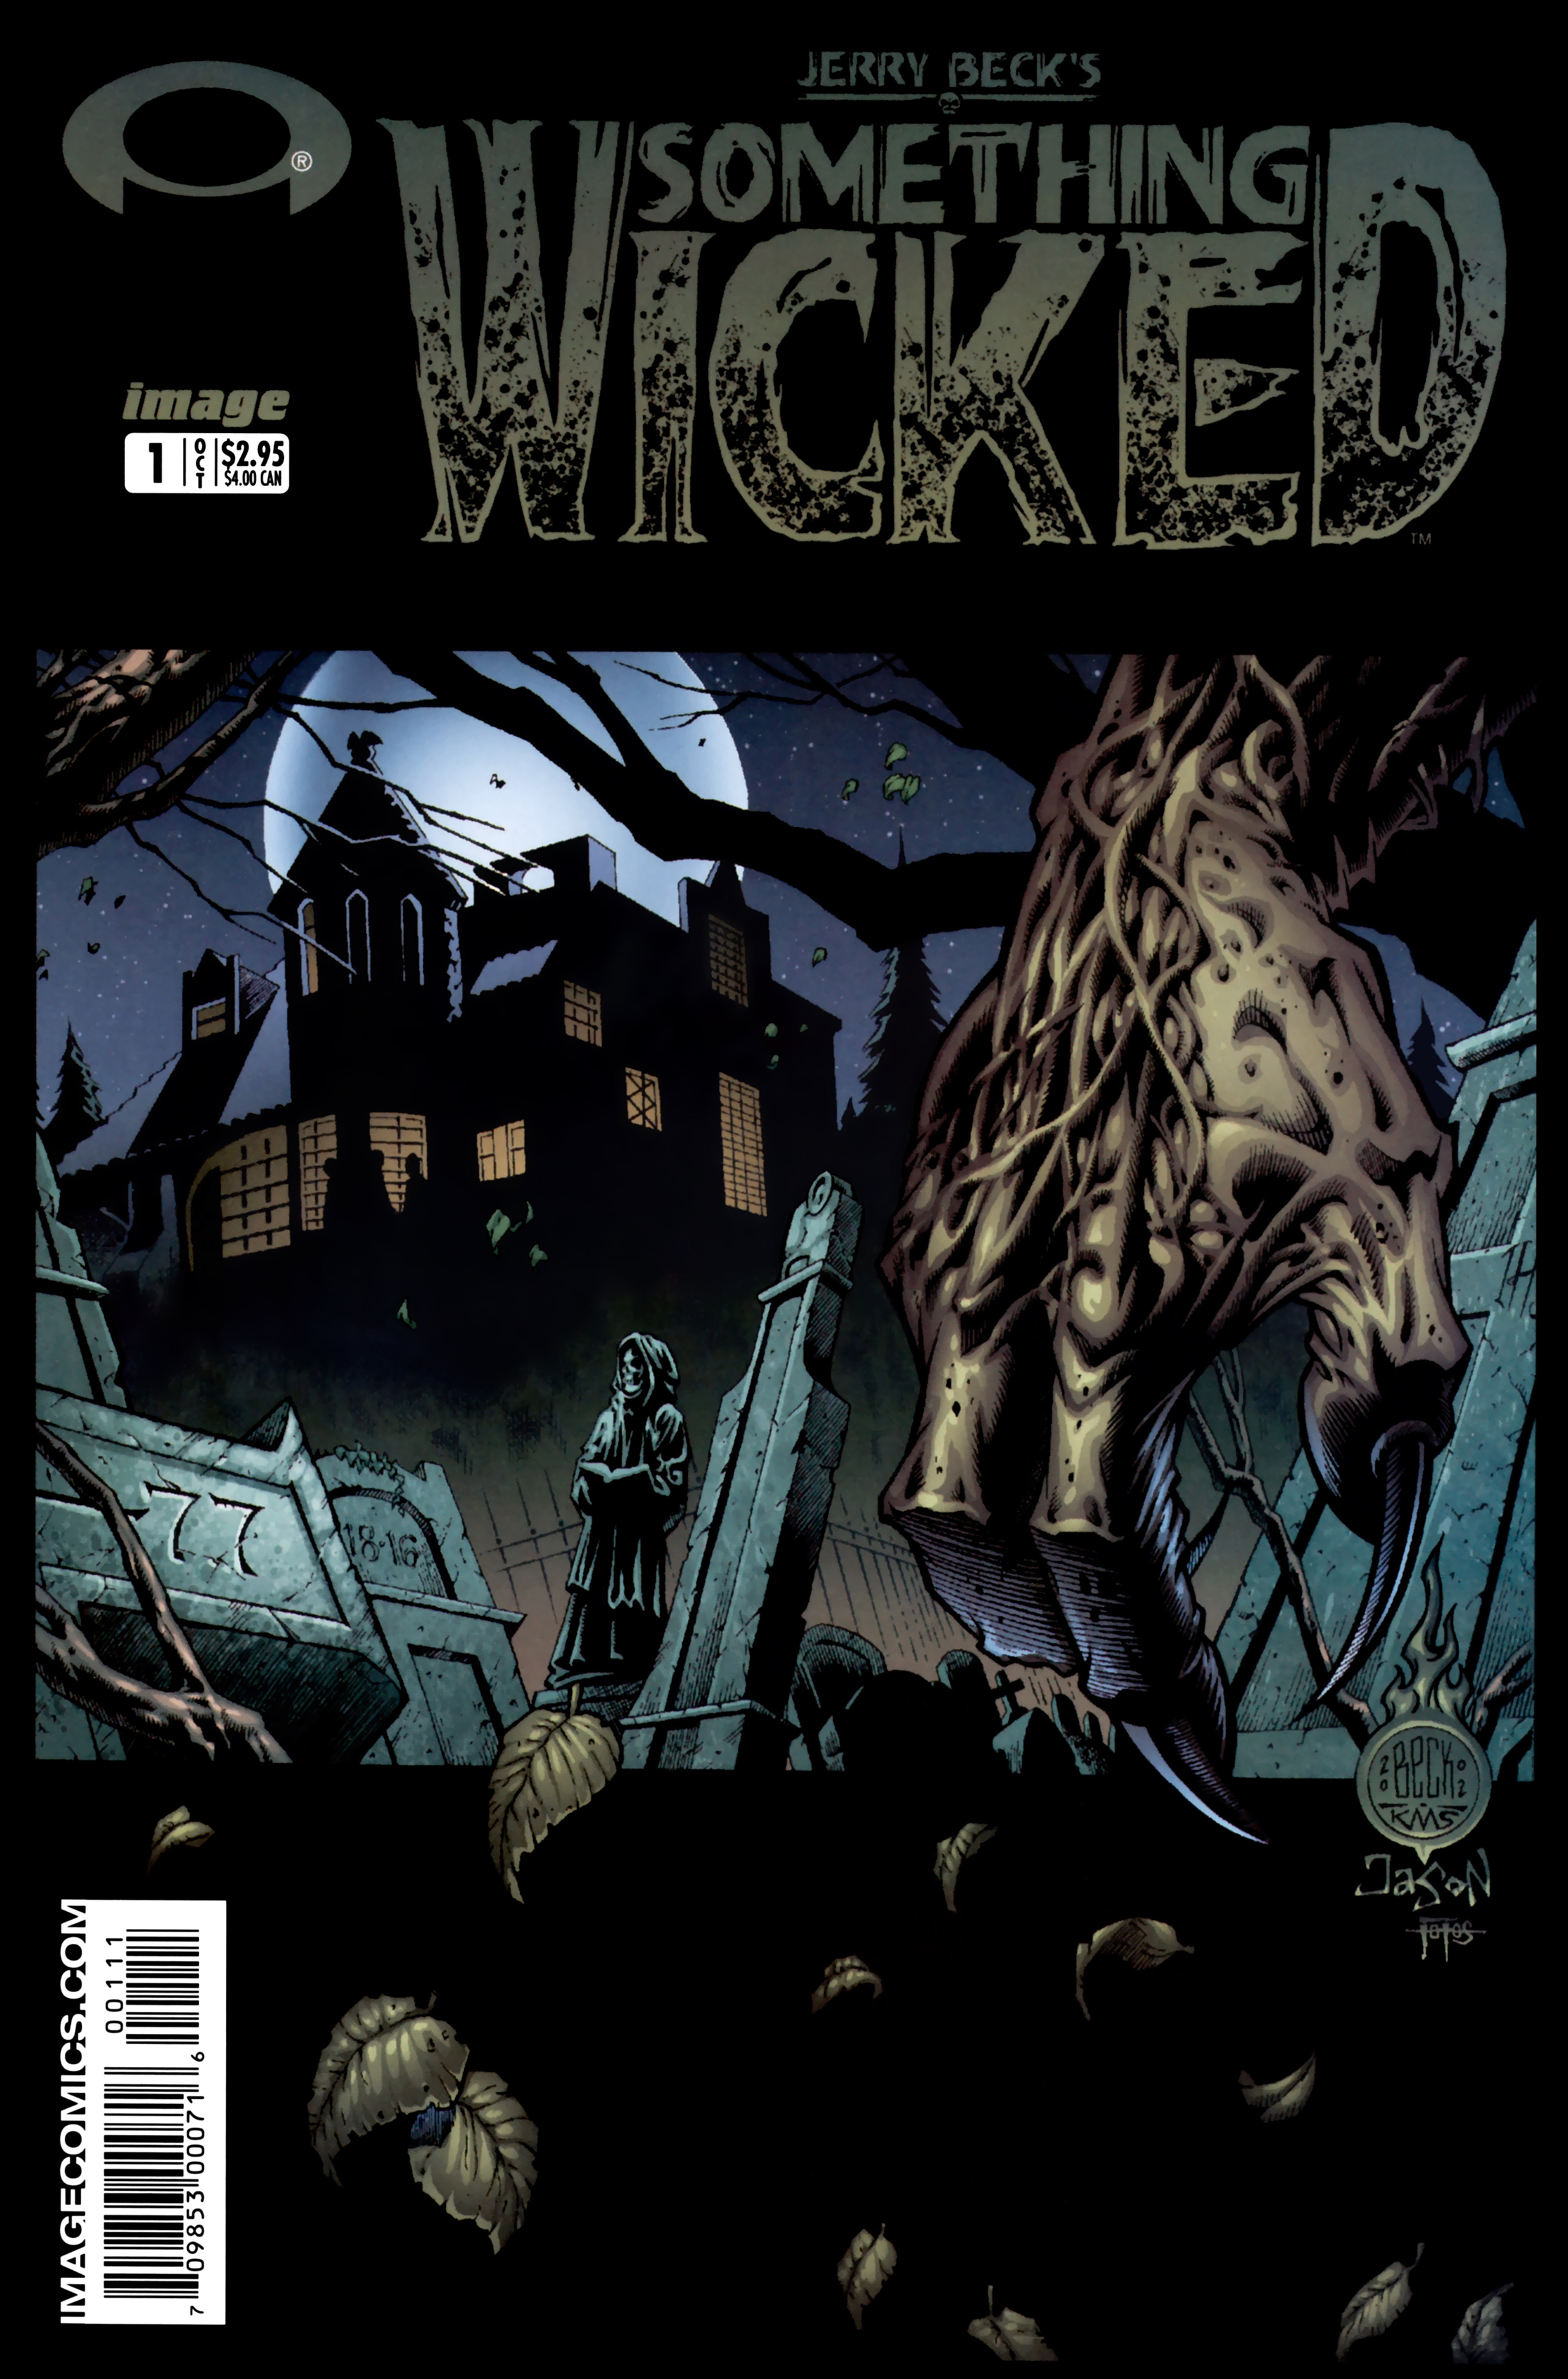 Read online Something Wicked comic -  Issue #1 - 1